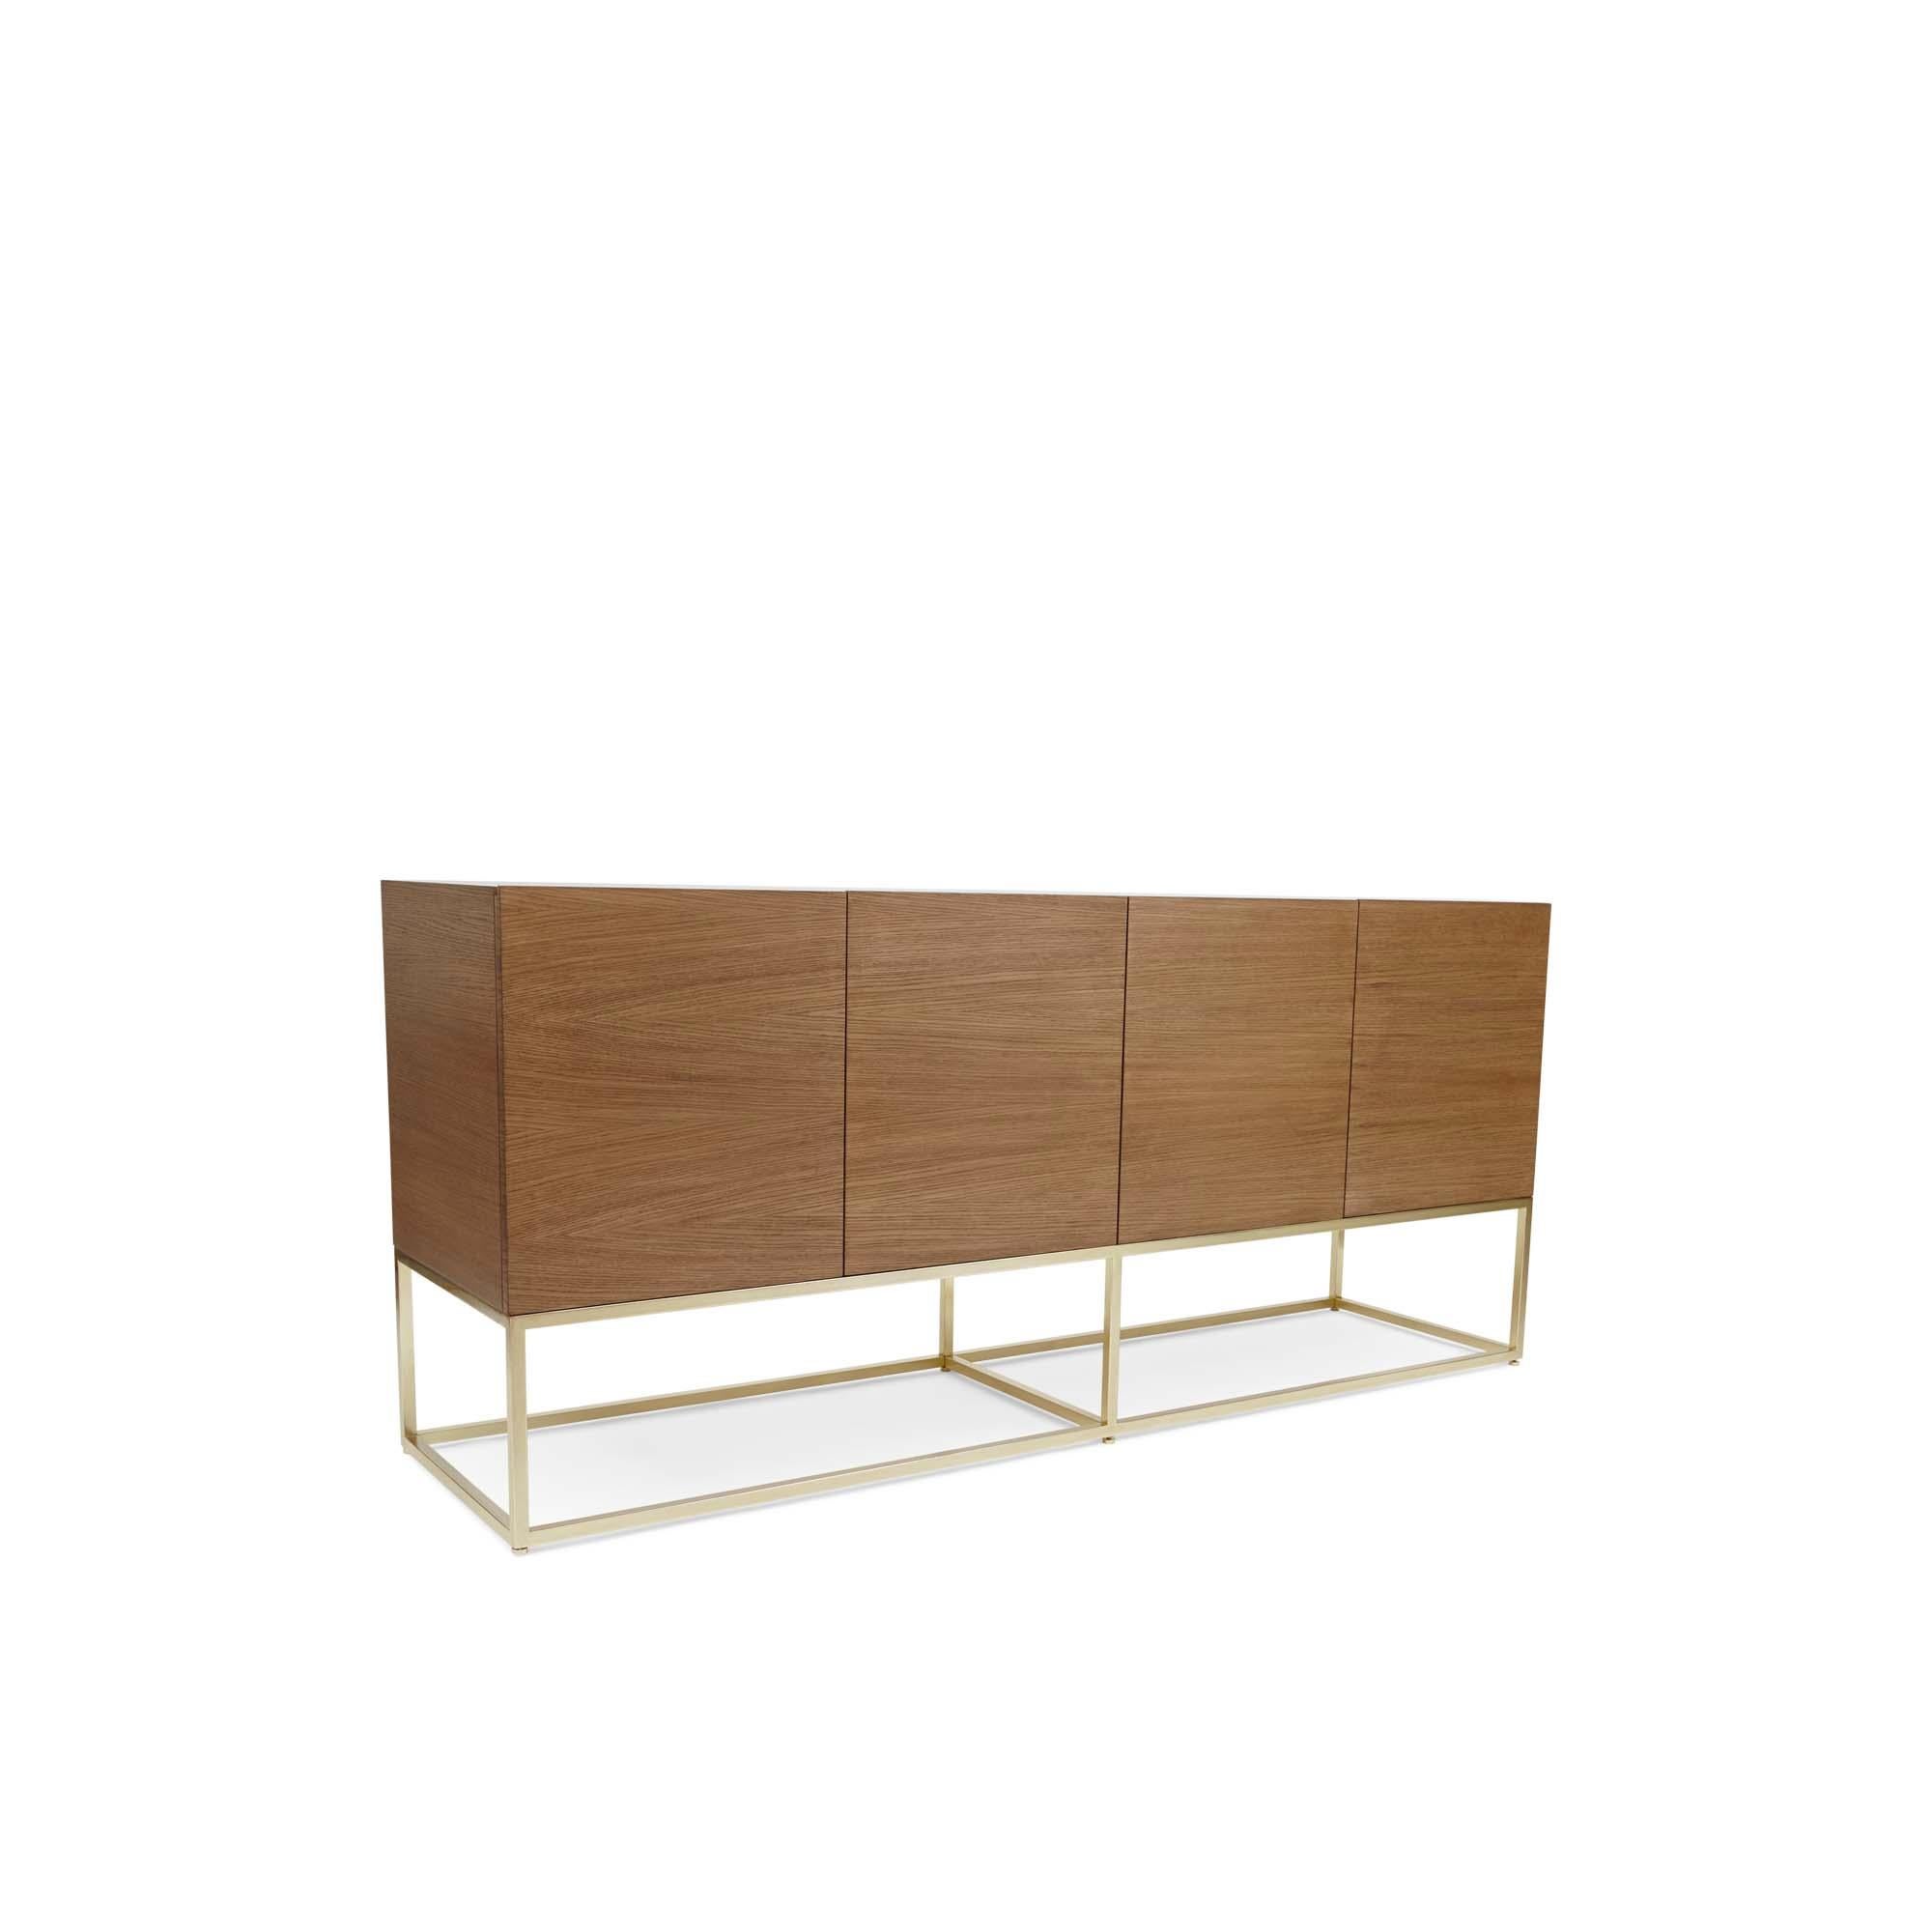 American Oak and Brass Thin Frame Cabinet by Lawson-Fenning